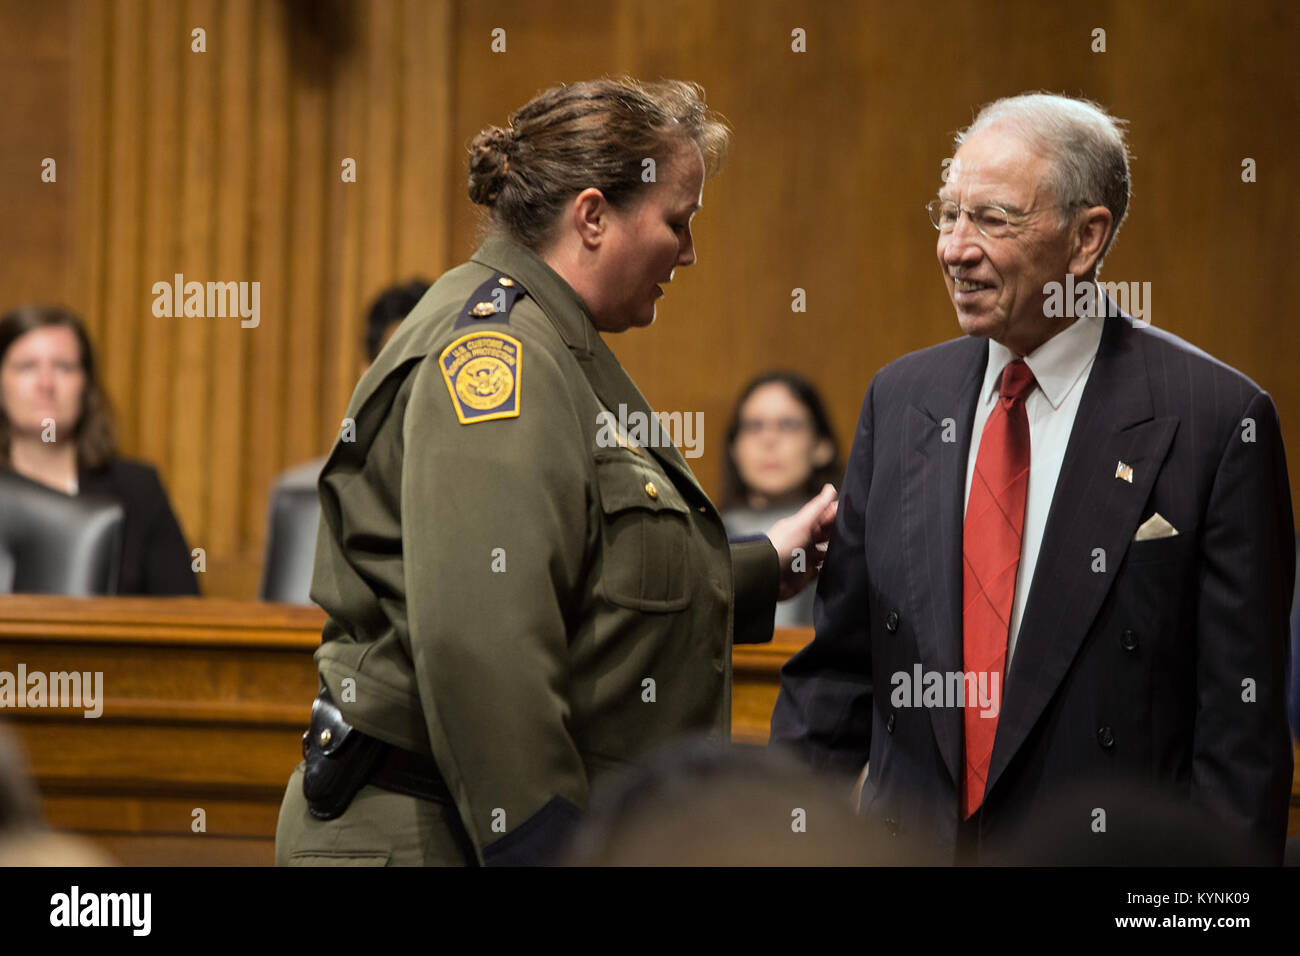 U.S. Customs and Border Protection, USBP Acting Chief Carla Provost testified before the Judiciary Committee hearing on the subject &quot;The MS-13 Problem: Investigating Gang Membership, its Nexus to Illegal Immigration, and Federal Efforts to End the Threat&quot; at the Dirksen Senate Office Building.  Seen here Acting Chief Carla speaks with the Chairman, Mr. Grassley prior to the start of the hearing.  Photographer: Donna Burton Stock Photo